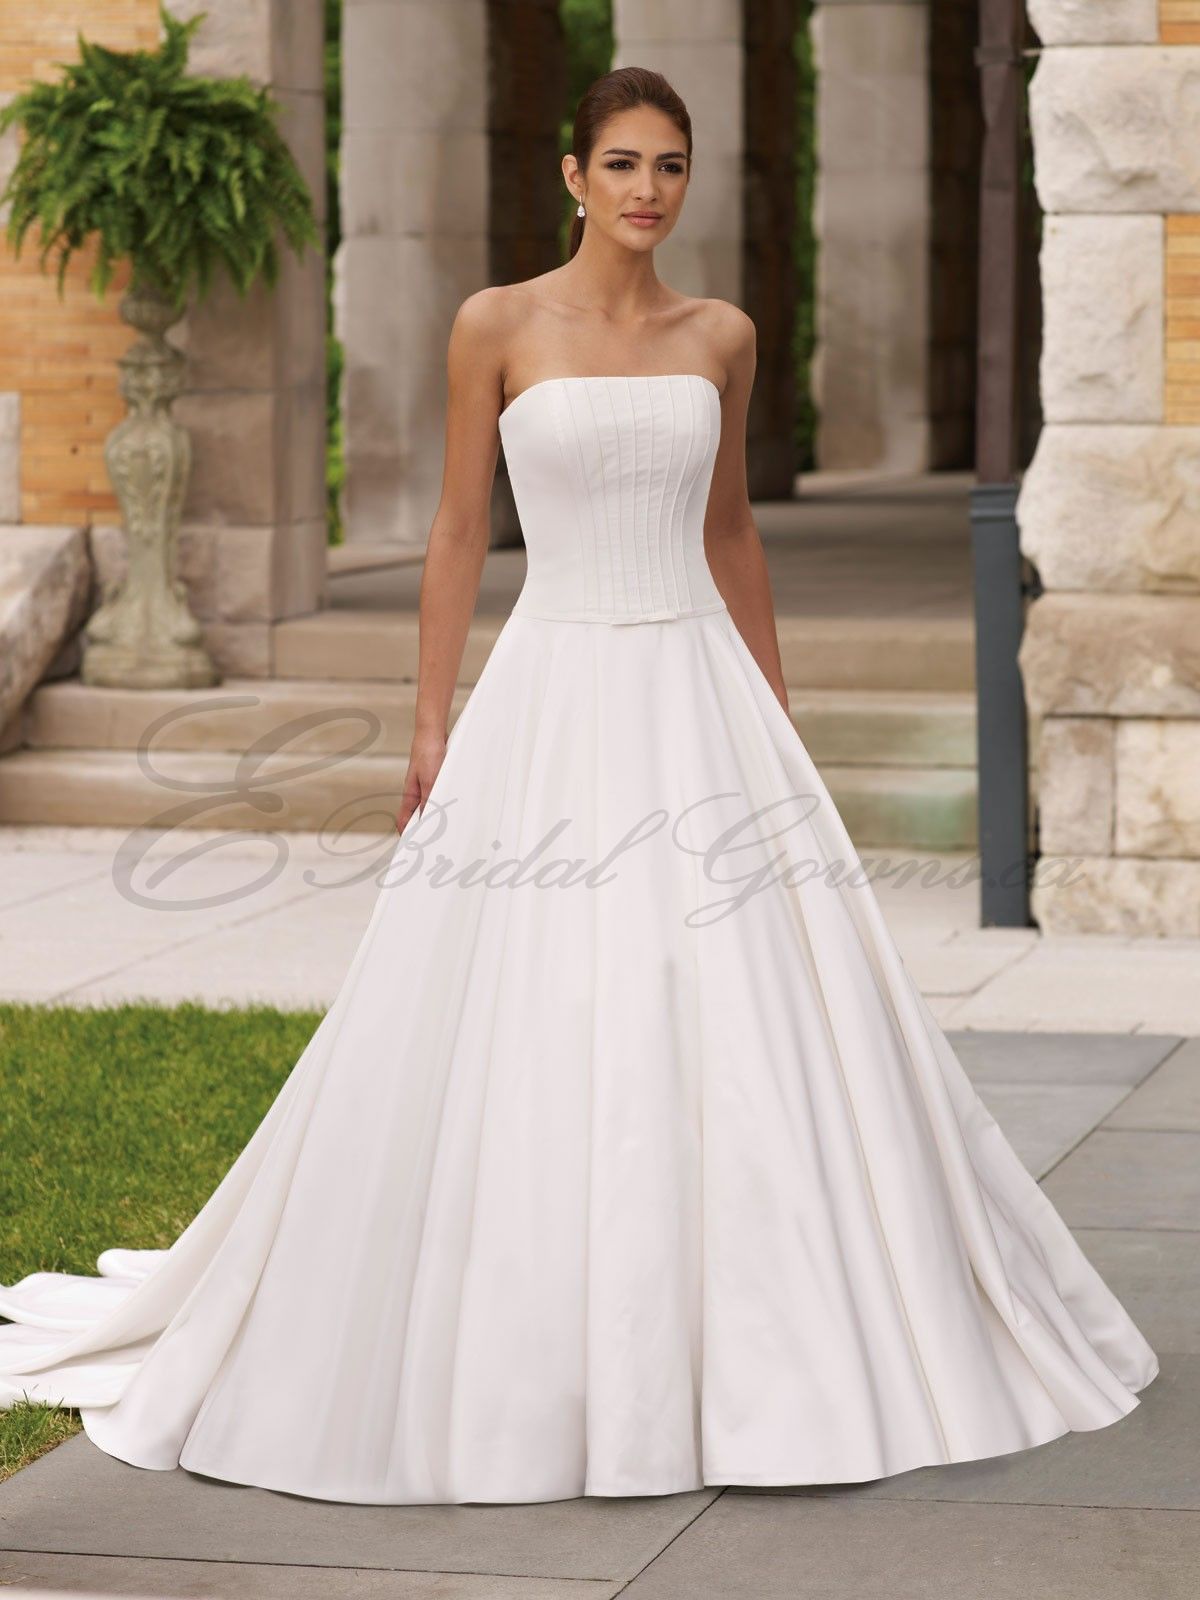 Ball Gown Length - Fashion Outlet Review